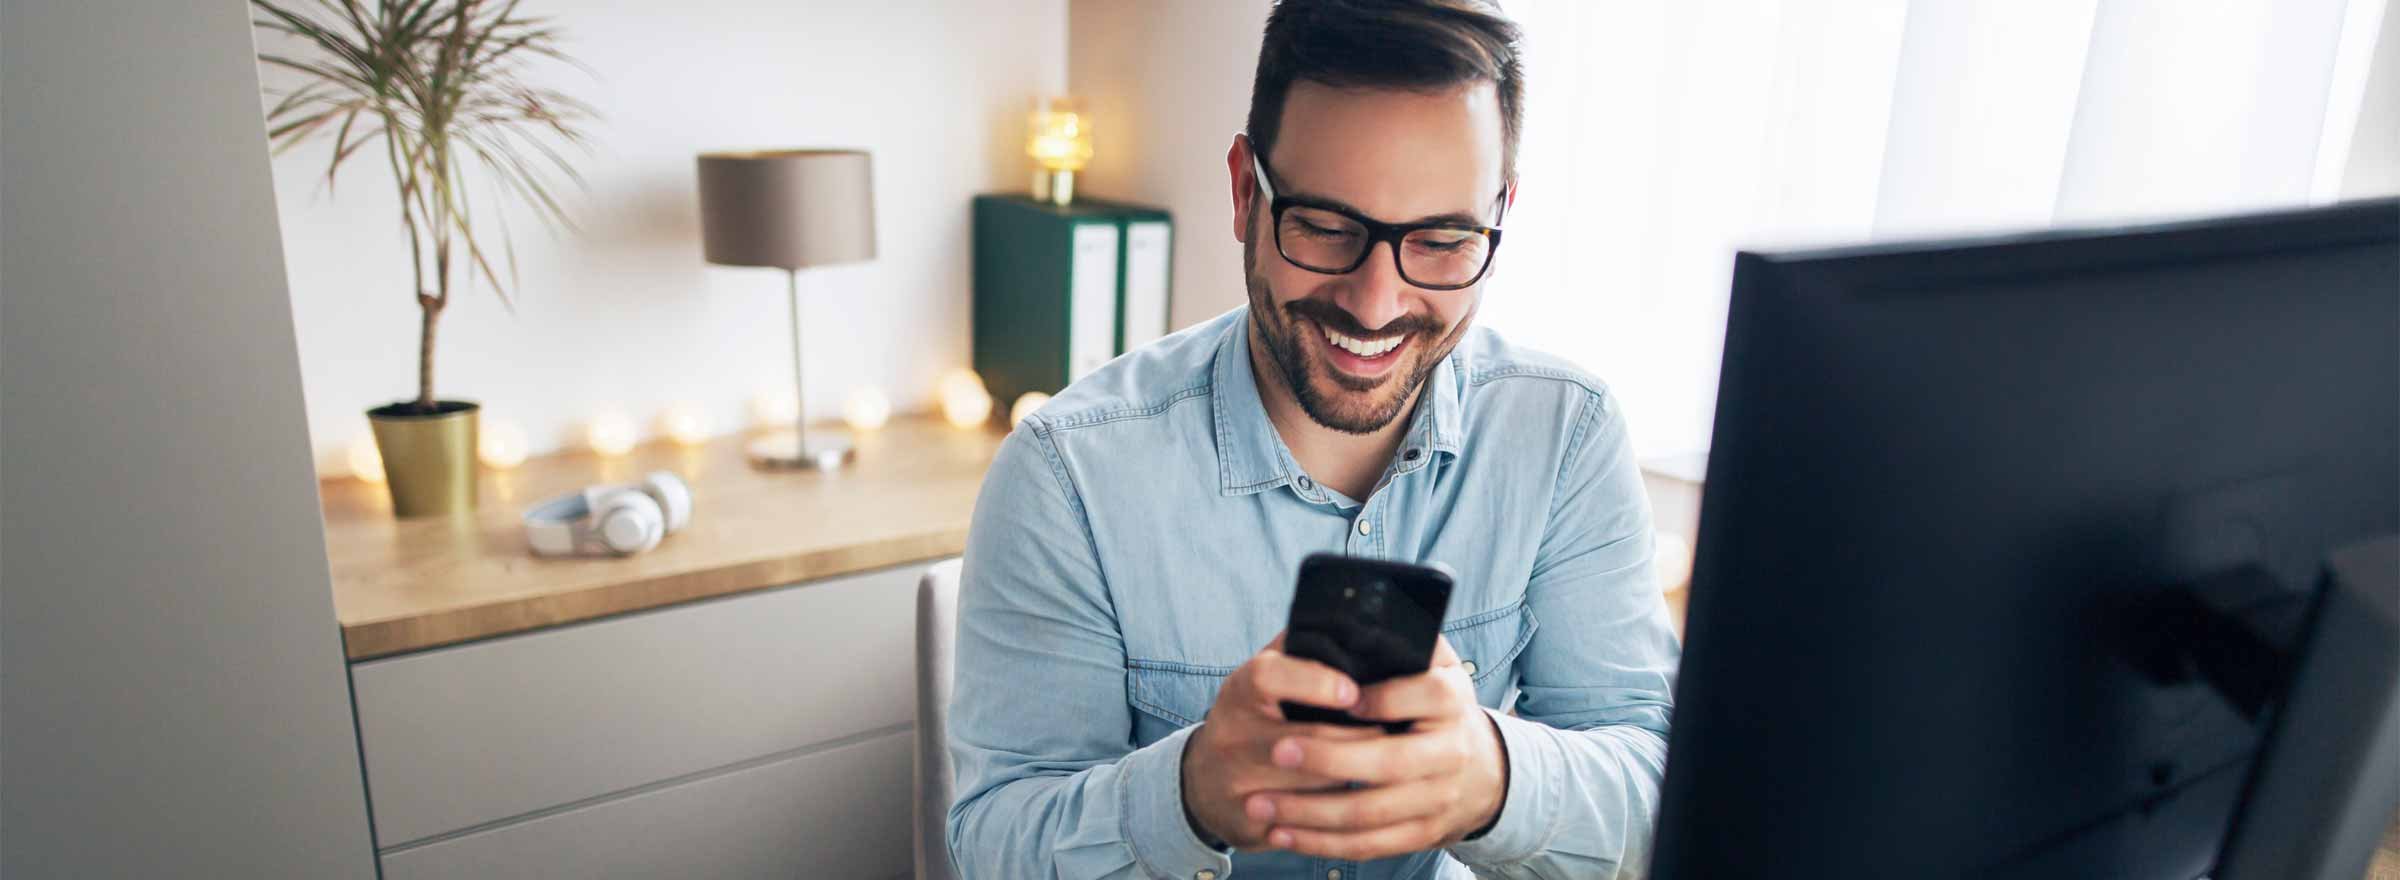 man sitting at a computer and smiling at a smartphone